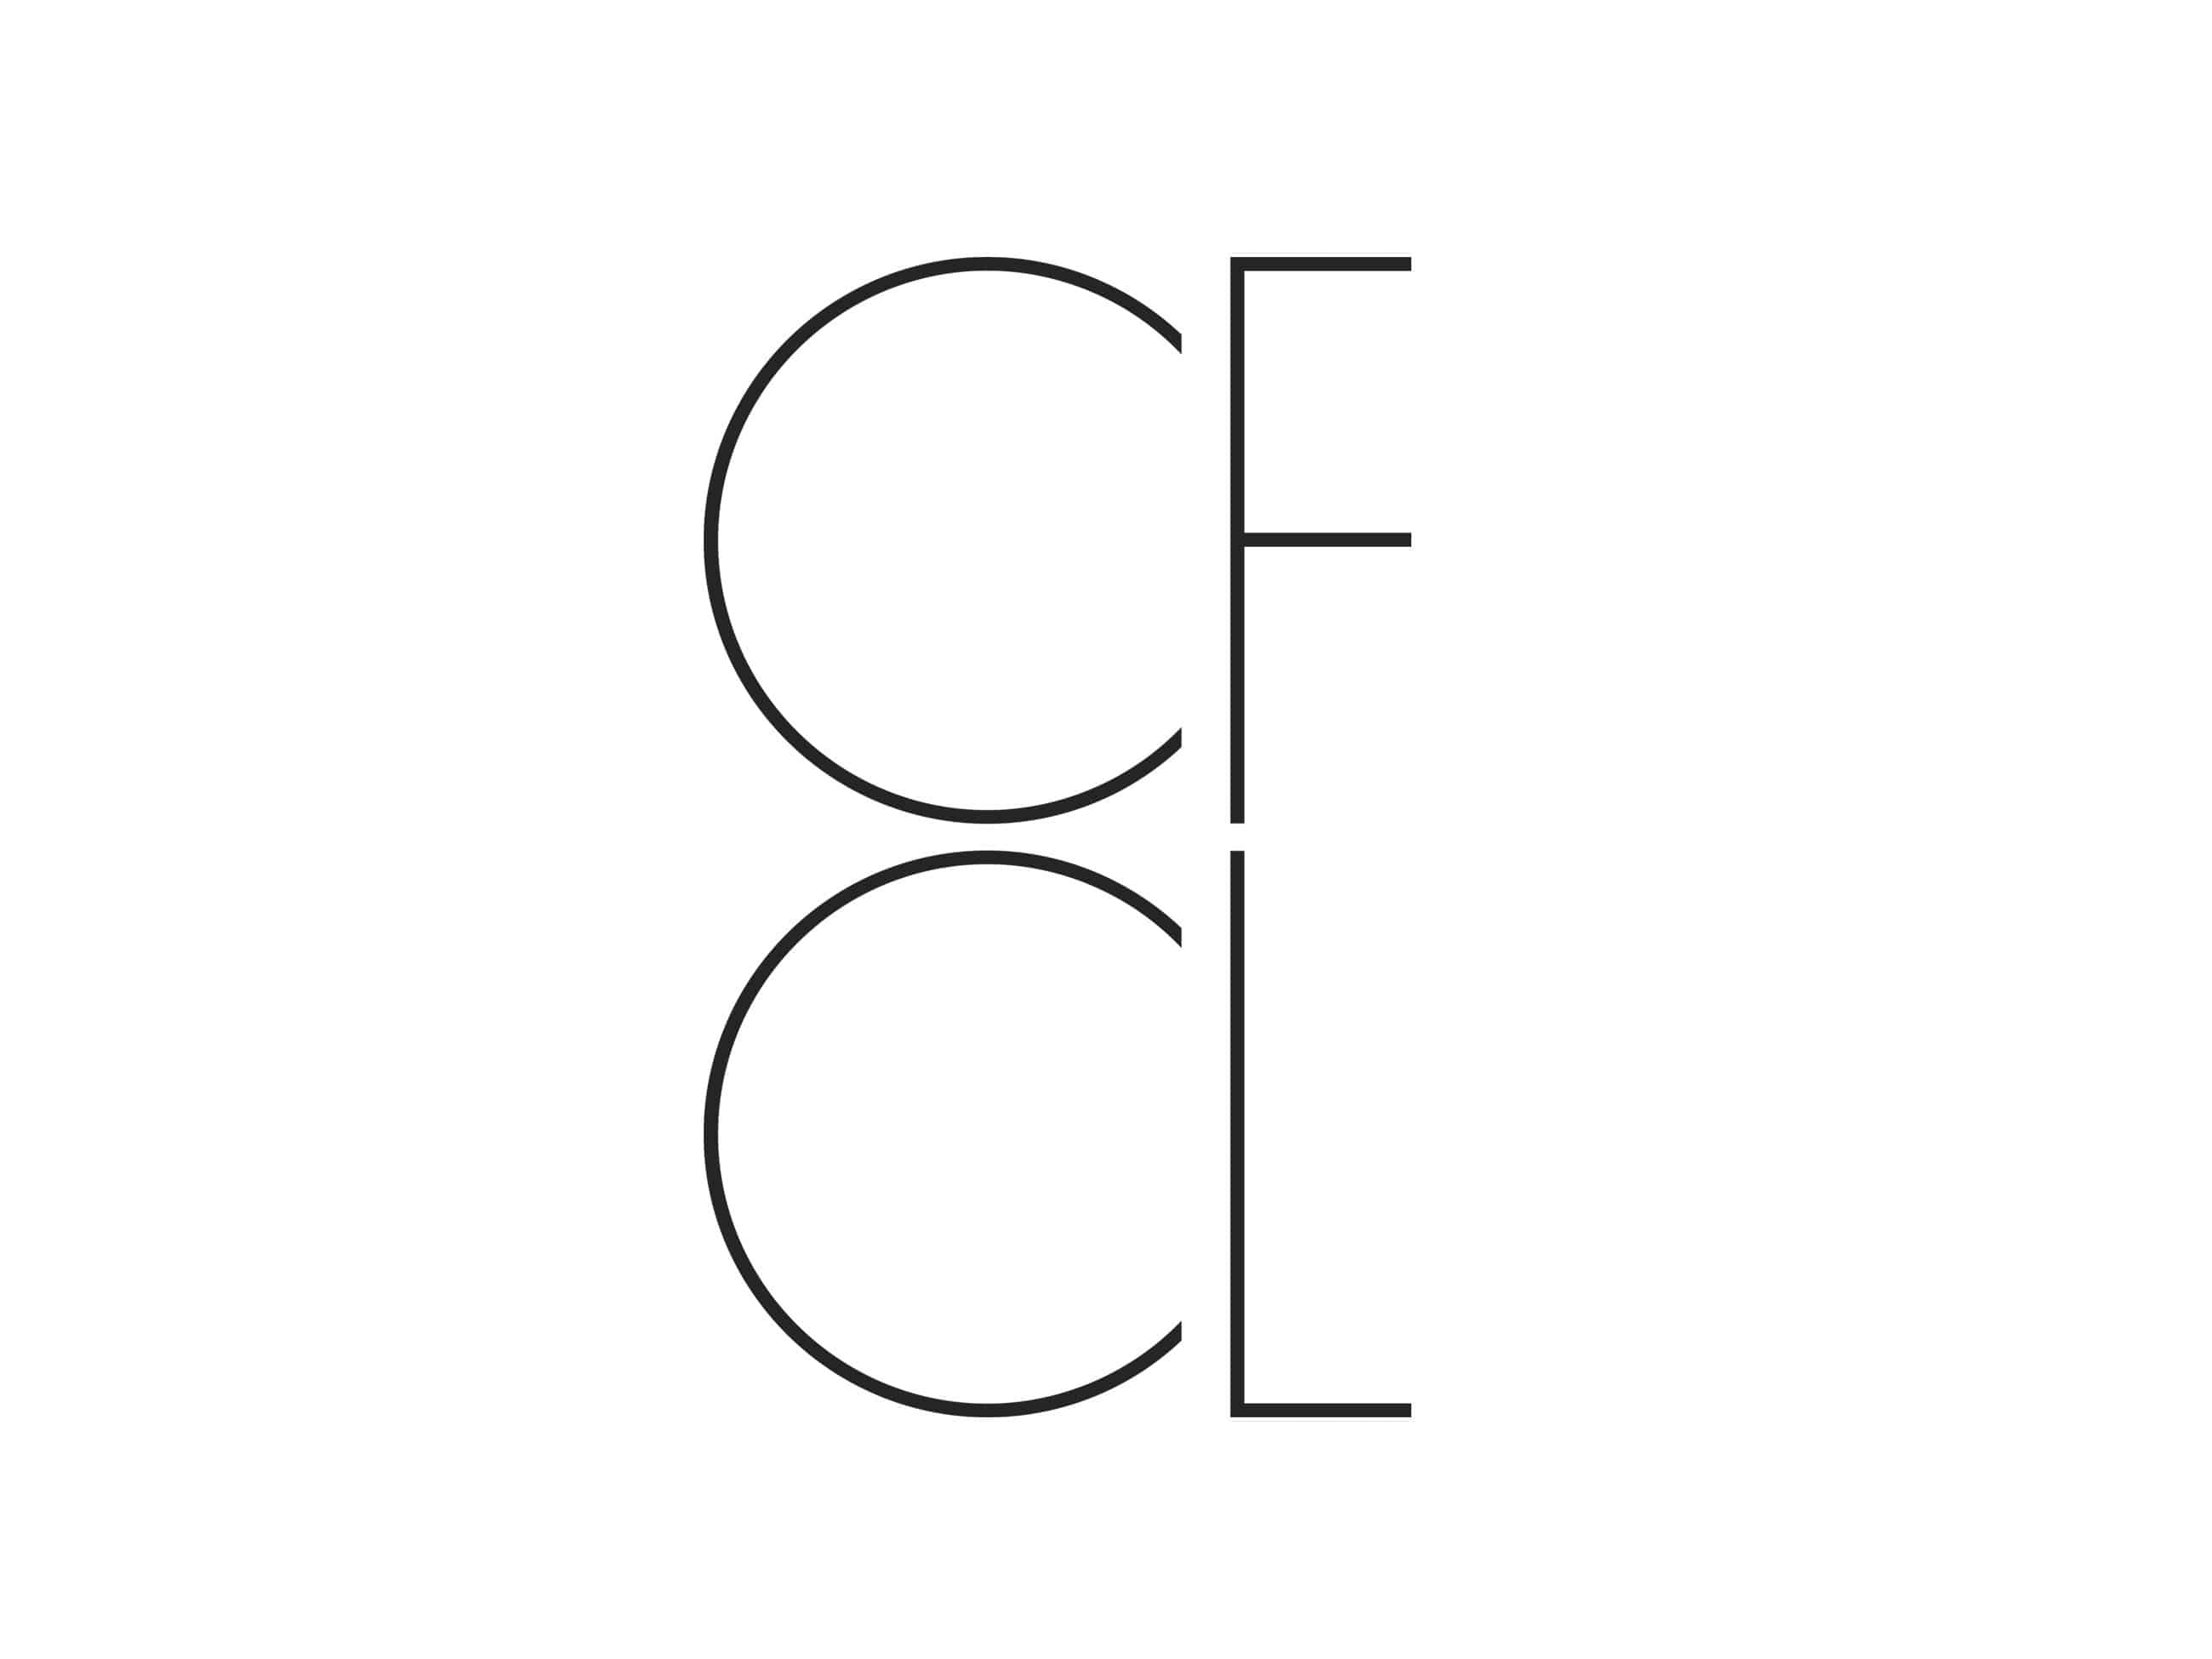 CFCL pop up store